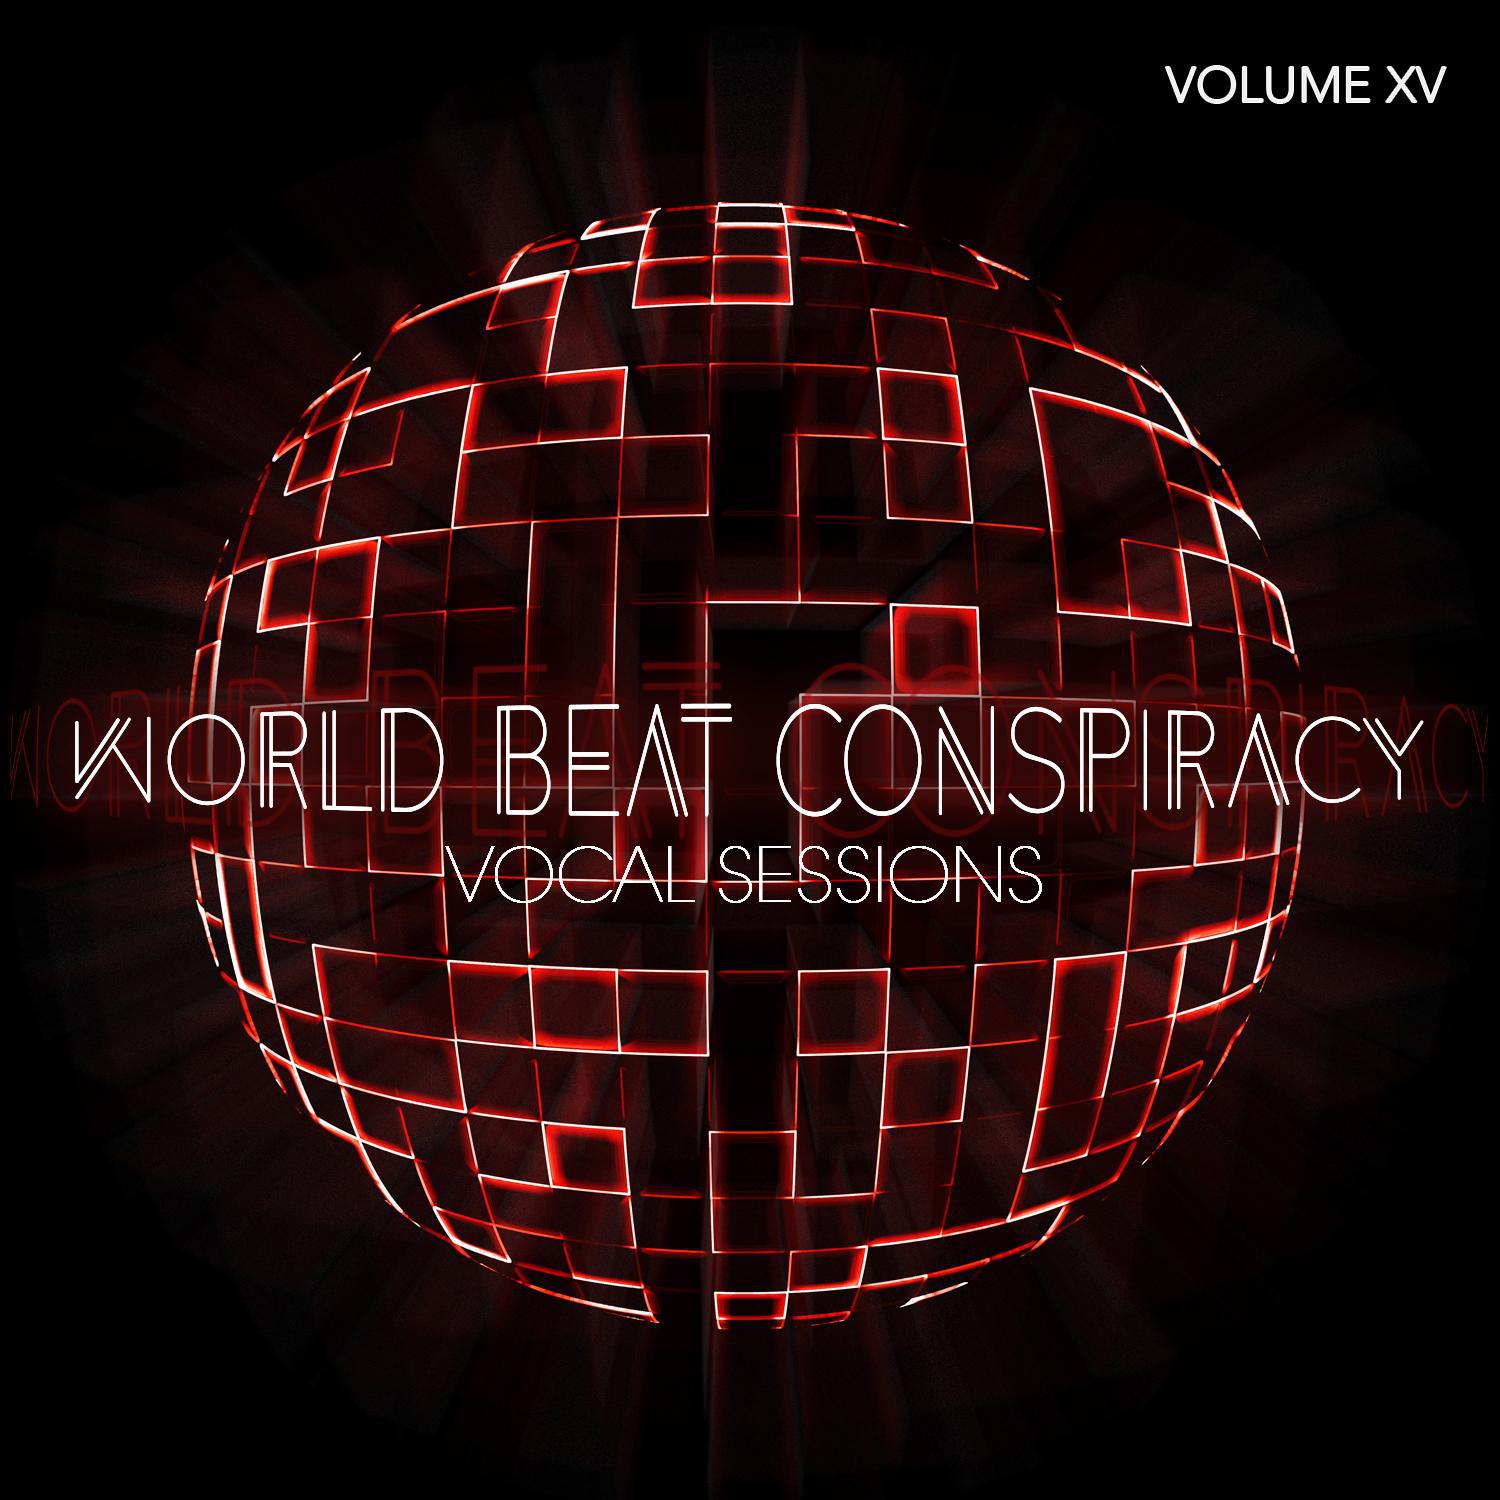 World Beat Conspiracy: Vocal Sessions, Vol. 15